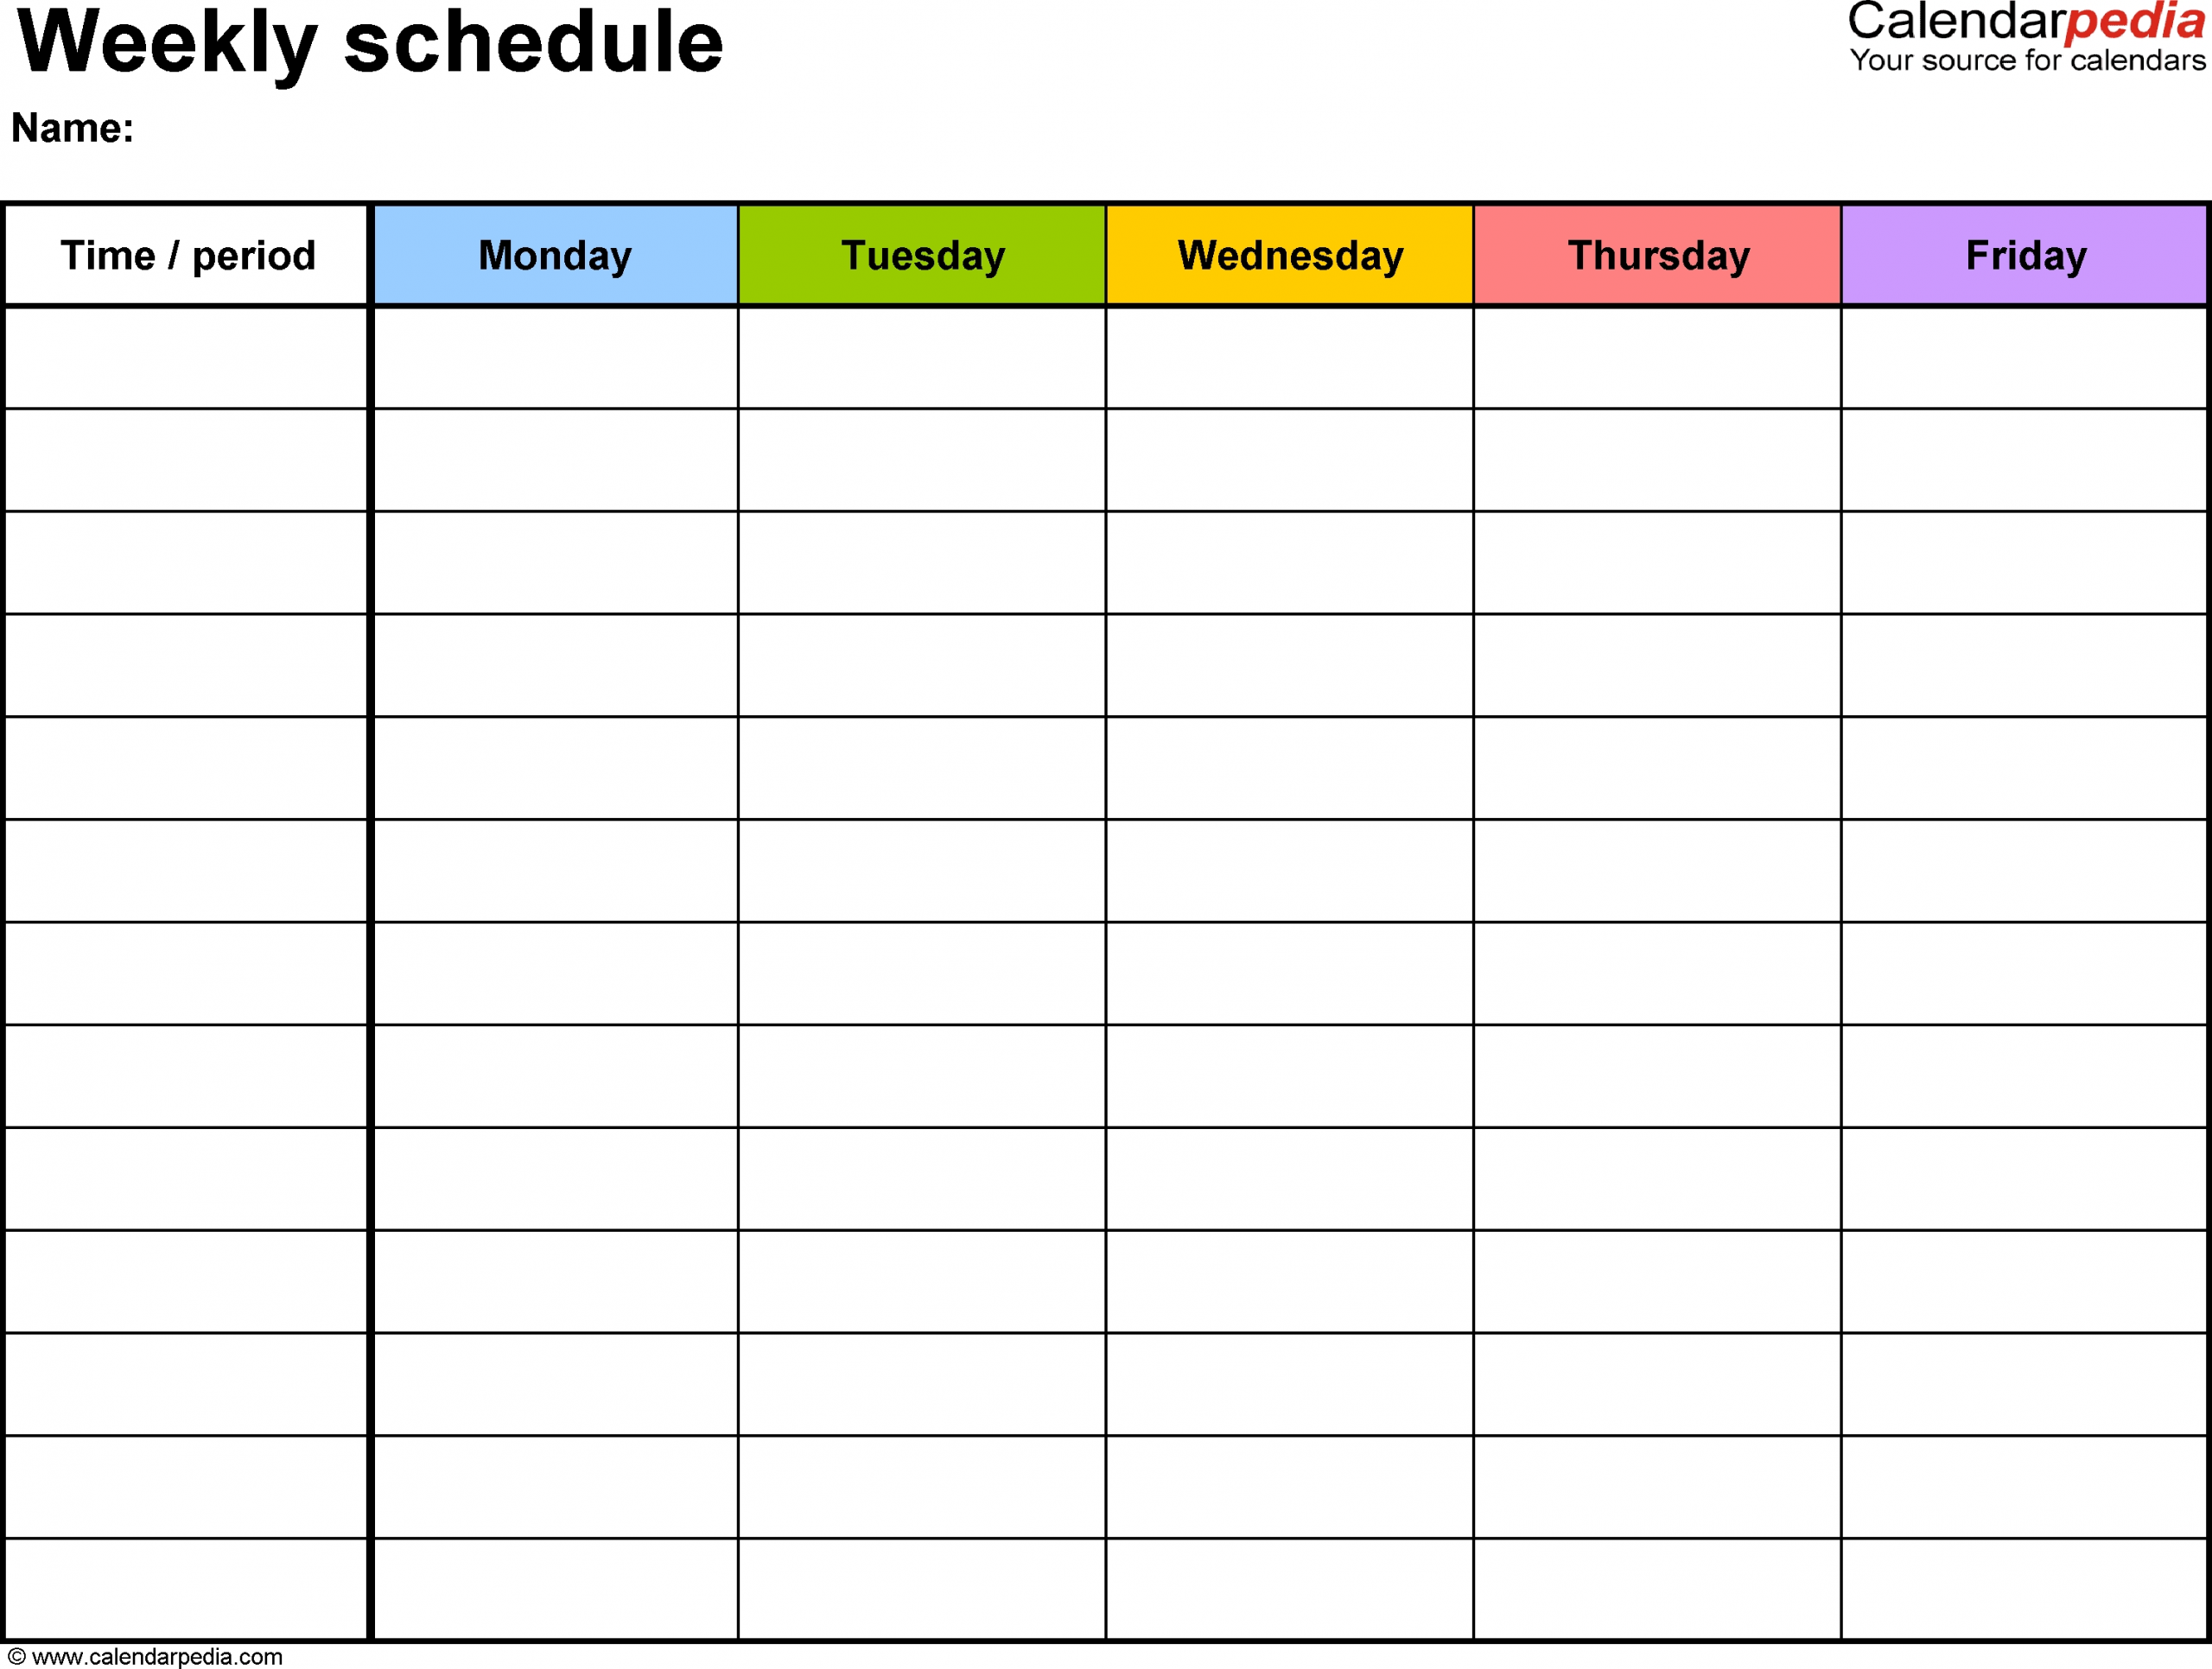 Free Weekly Schedule Templates For Word - 18 Templates intended for Printable Weekly Schedule Monday Through Friday